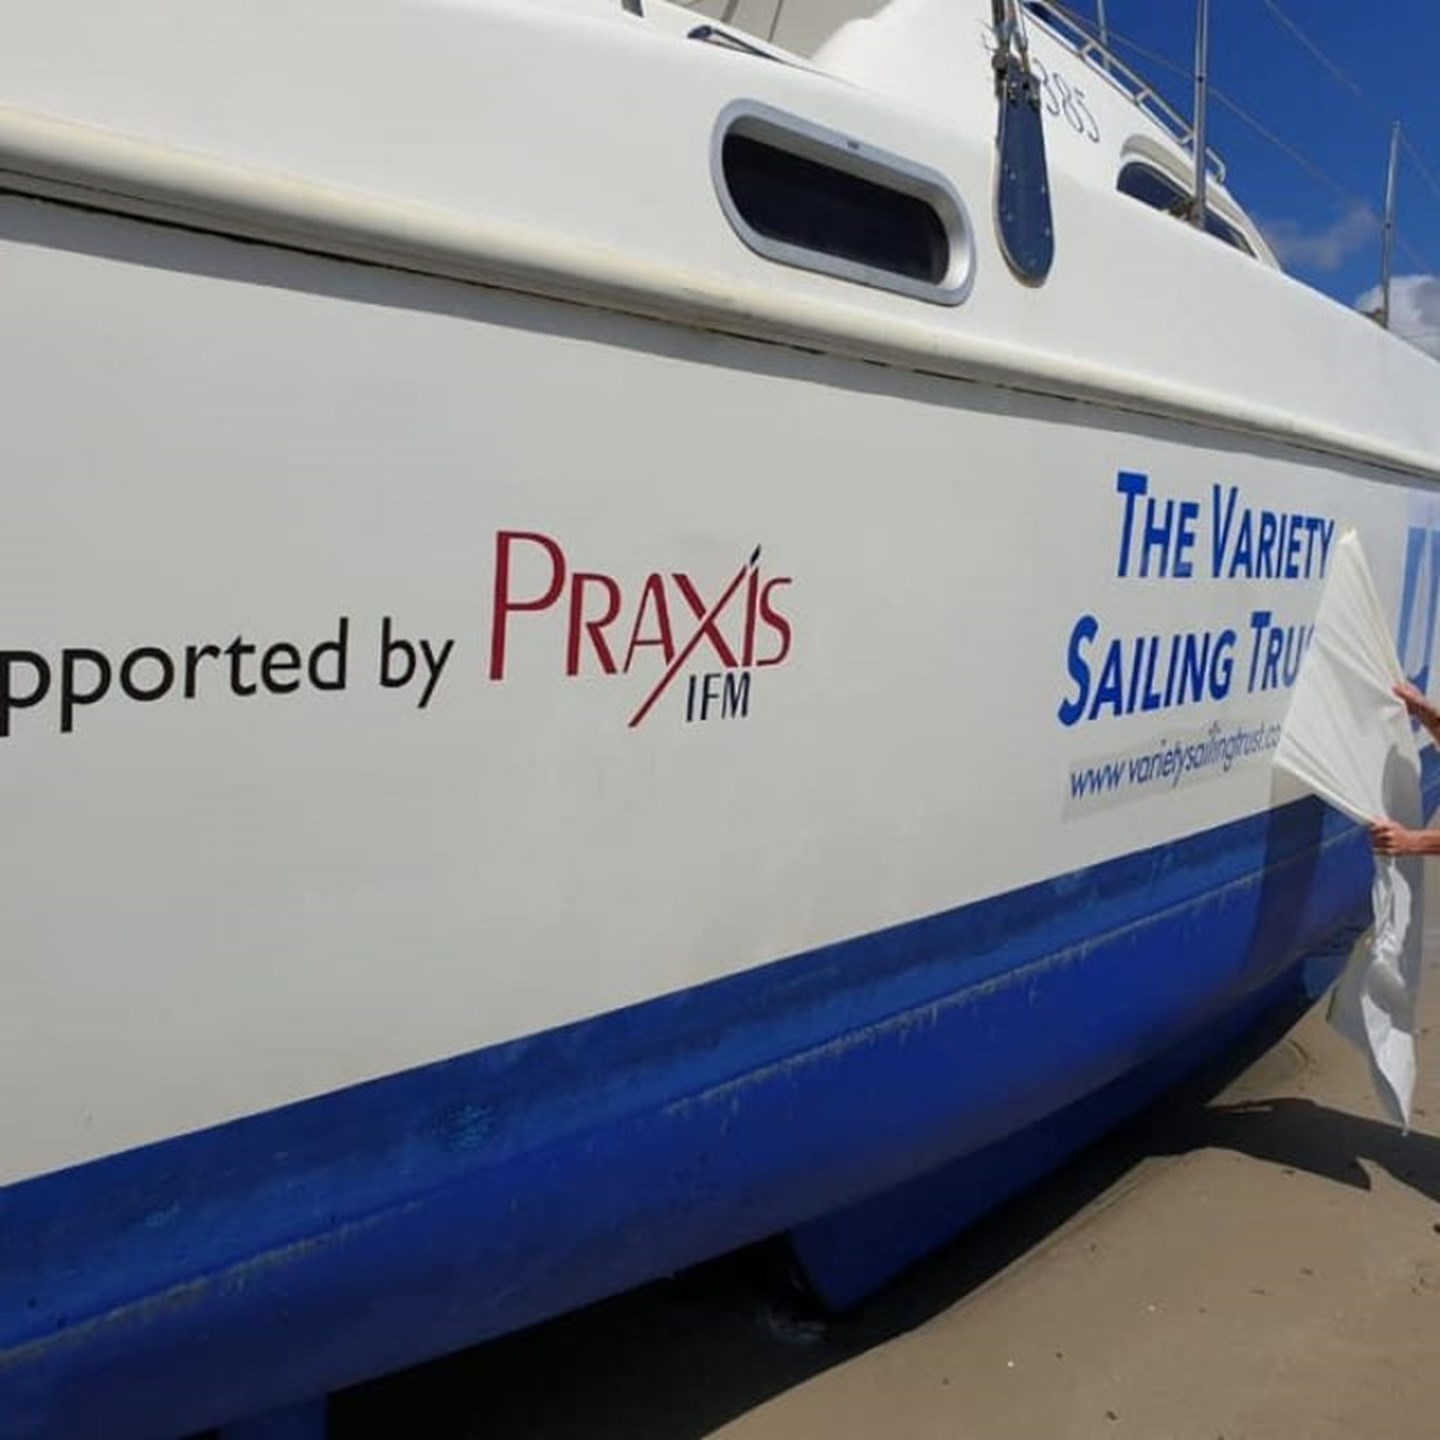 An image of a boat with the Praxis IFM logo printed on it as a sponsor